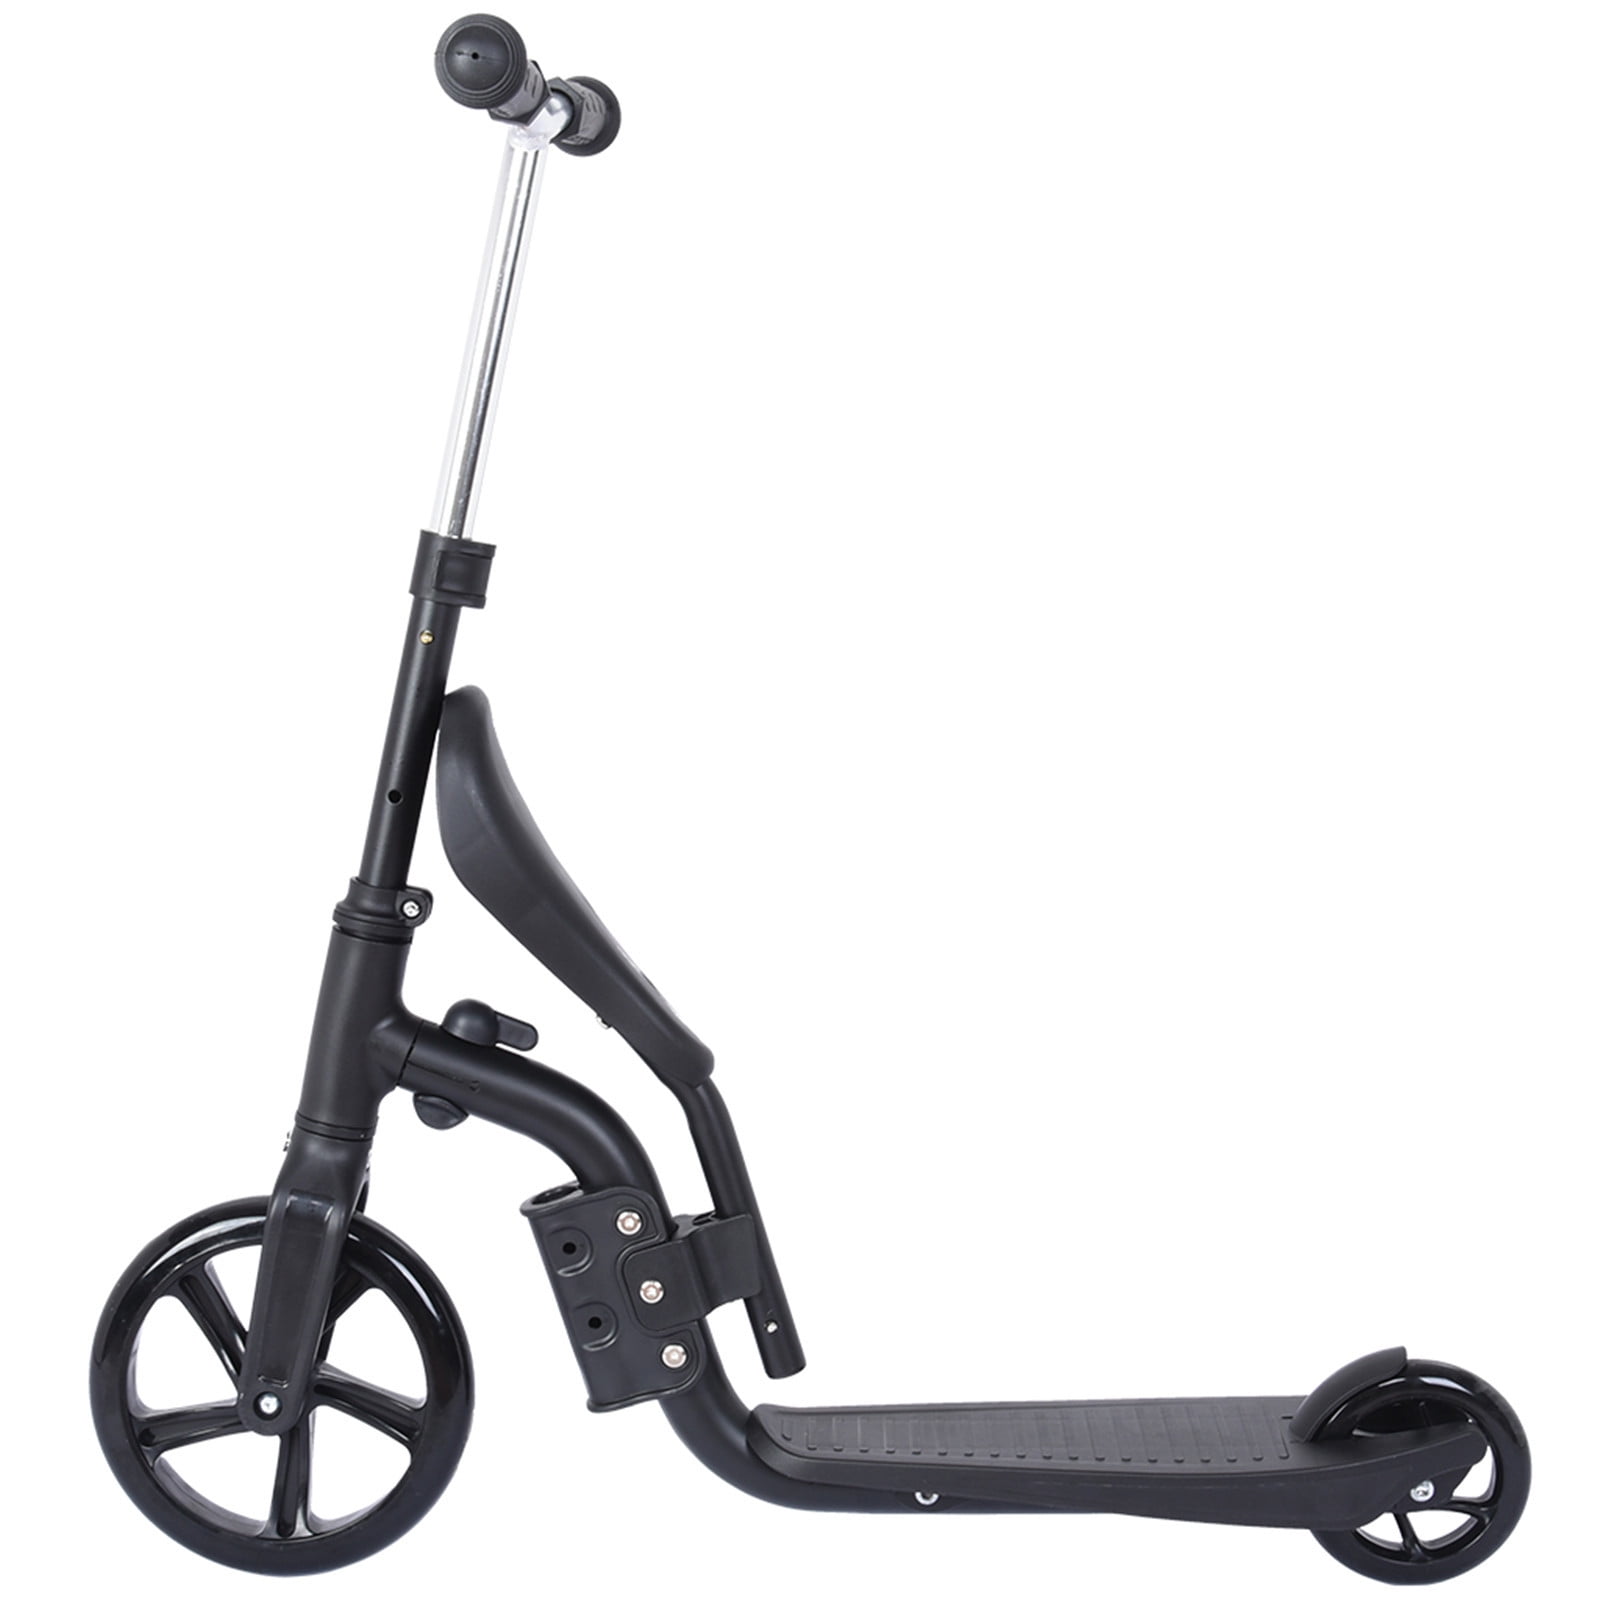 scooter suitable for 2 year old